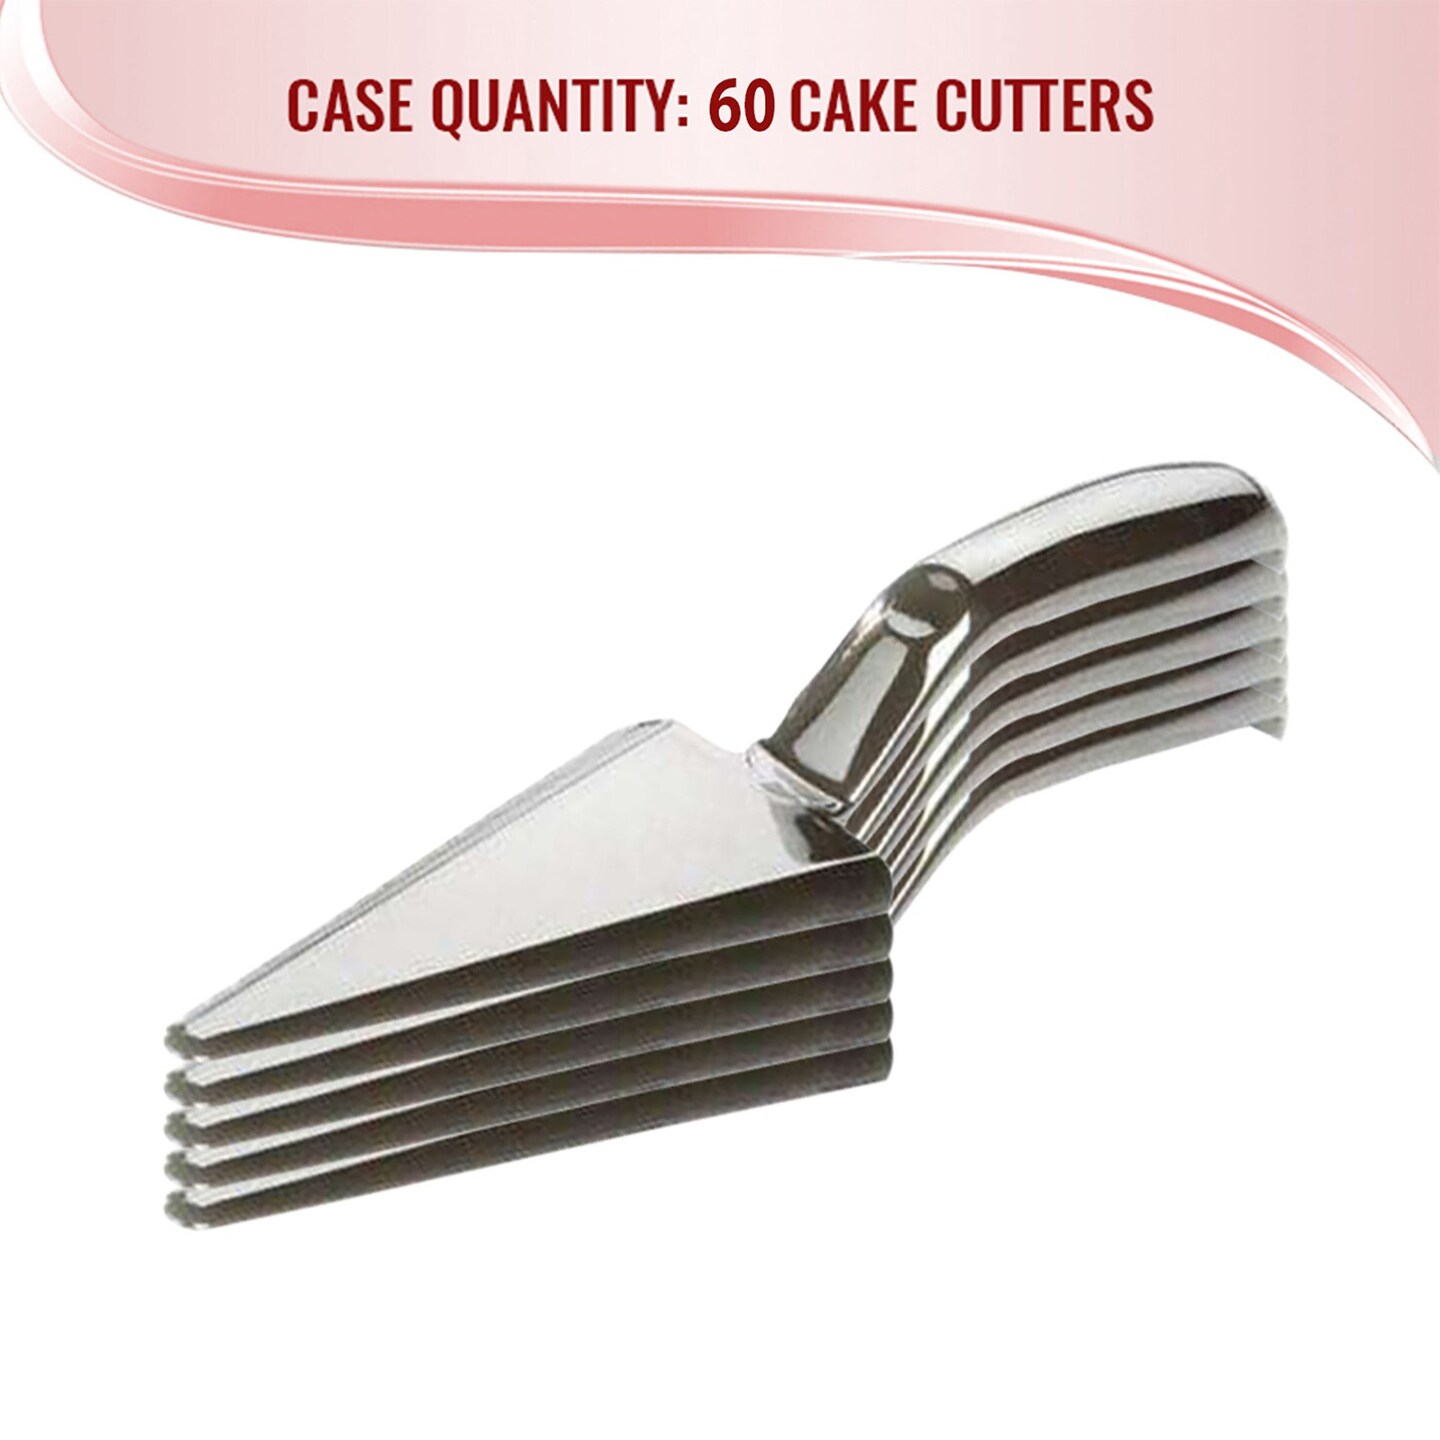 Shiny Silver Disposable Plastic Cake Cutters/Lifters (60 Cake Cutters)